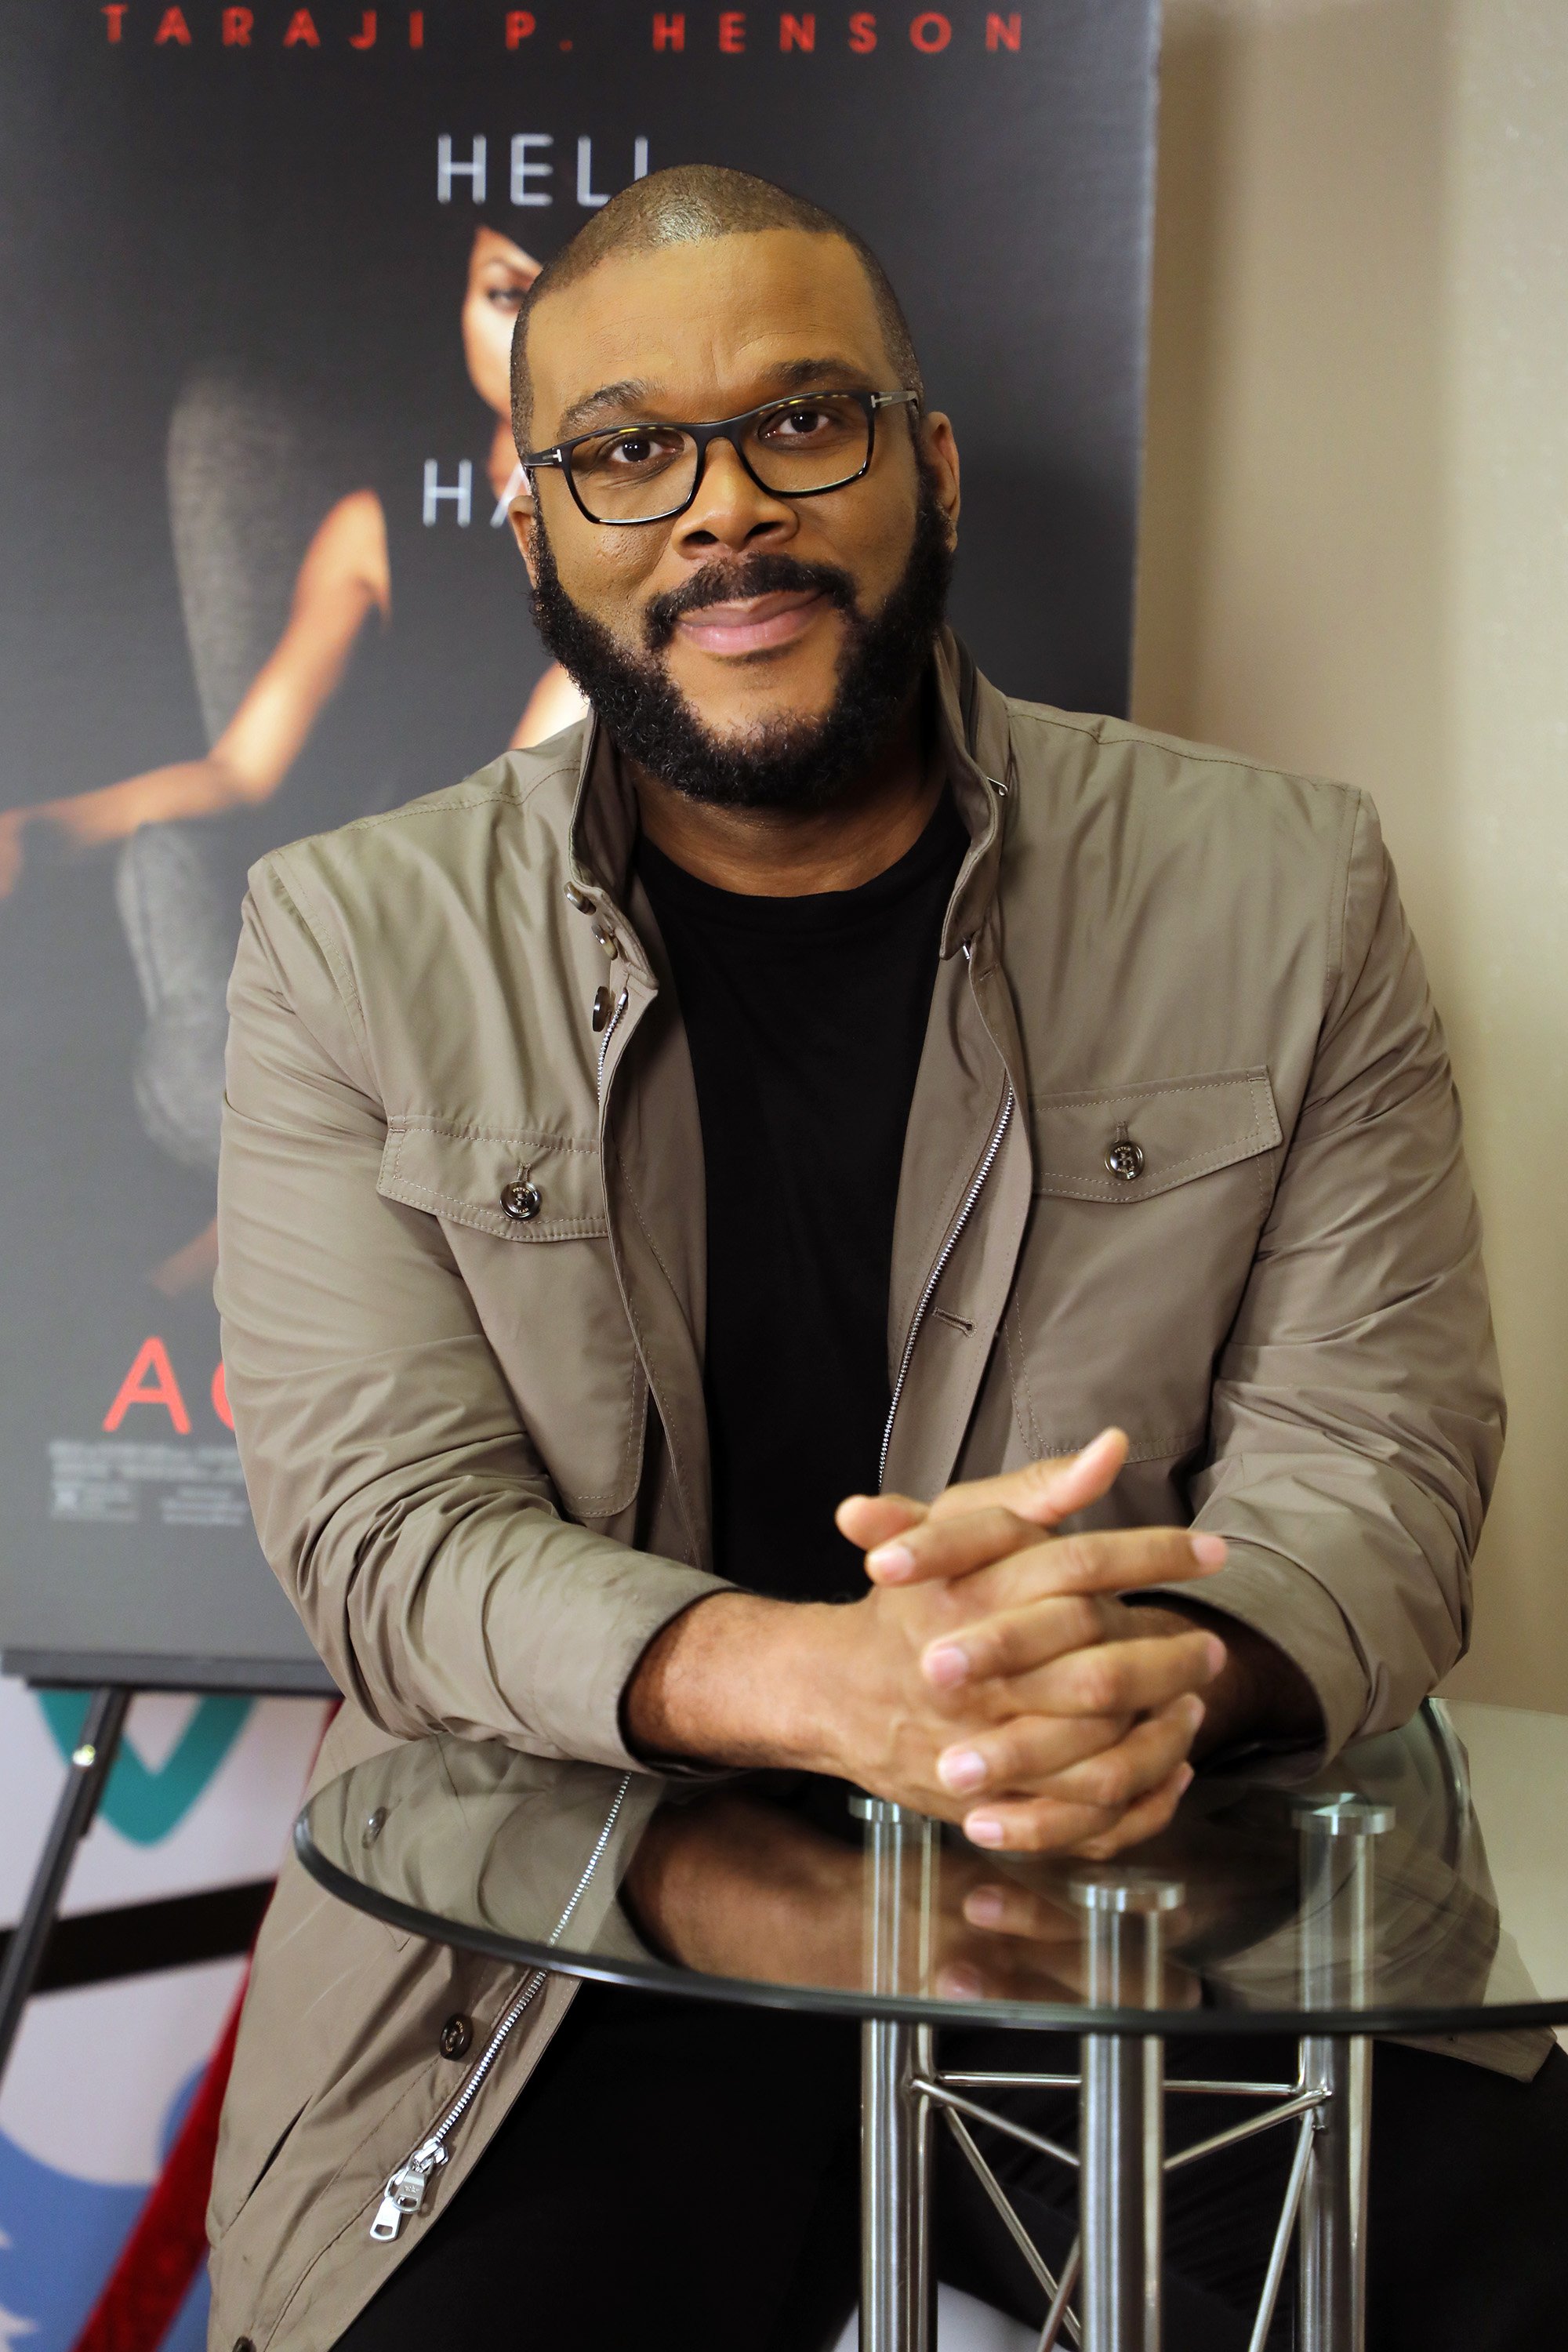 Mega producer Tyler Perry promoting a film in Florida in March 2019. | Photo: Getty Images